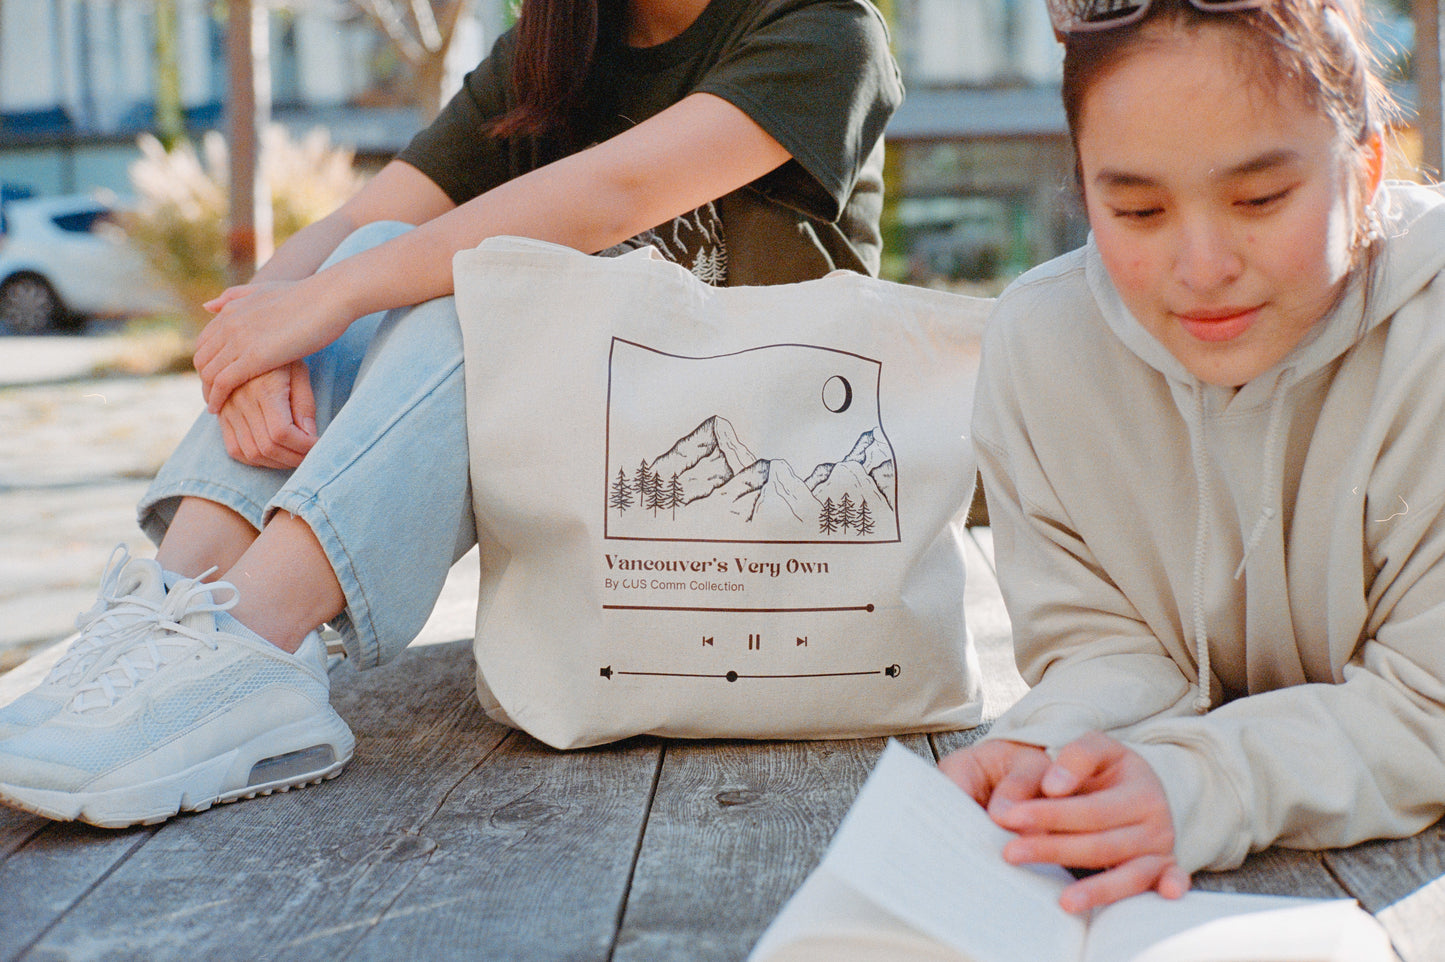 Vancouver's Very Own Tote Bag